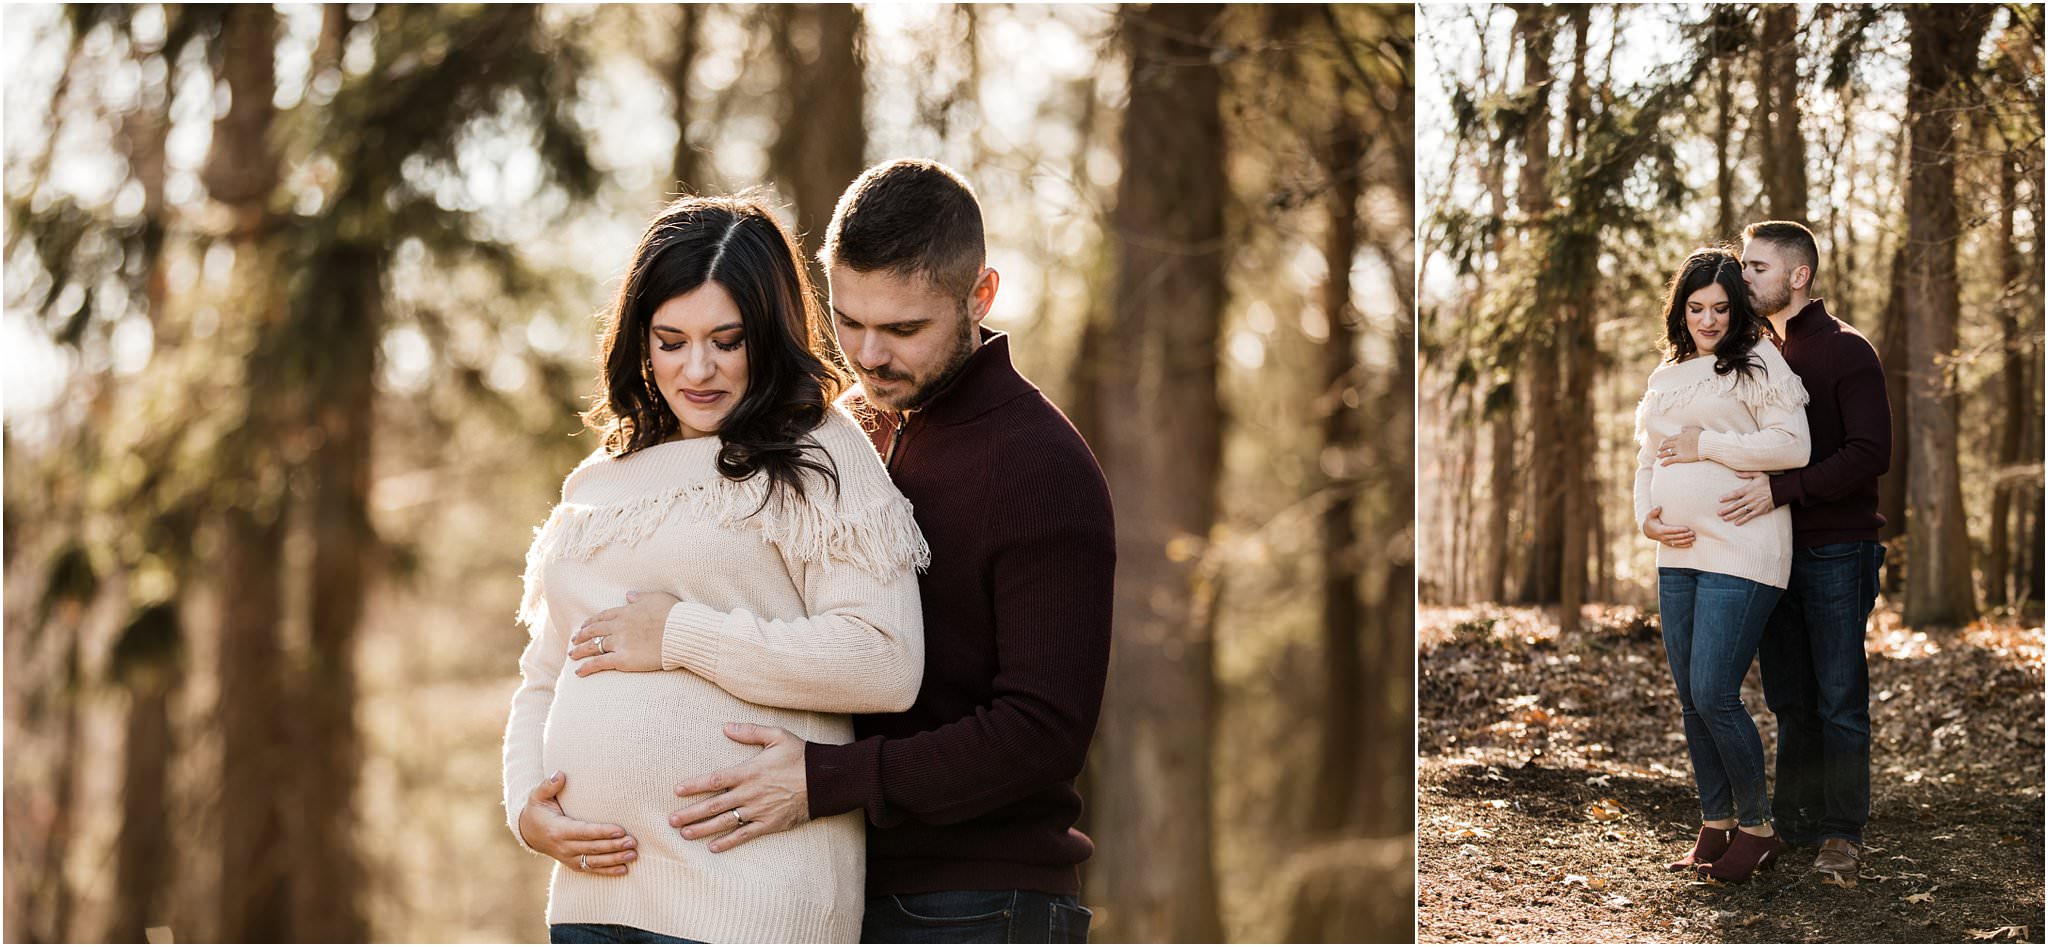 maternity session at hartwood acres pittsburgh